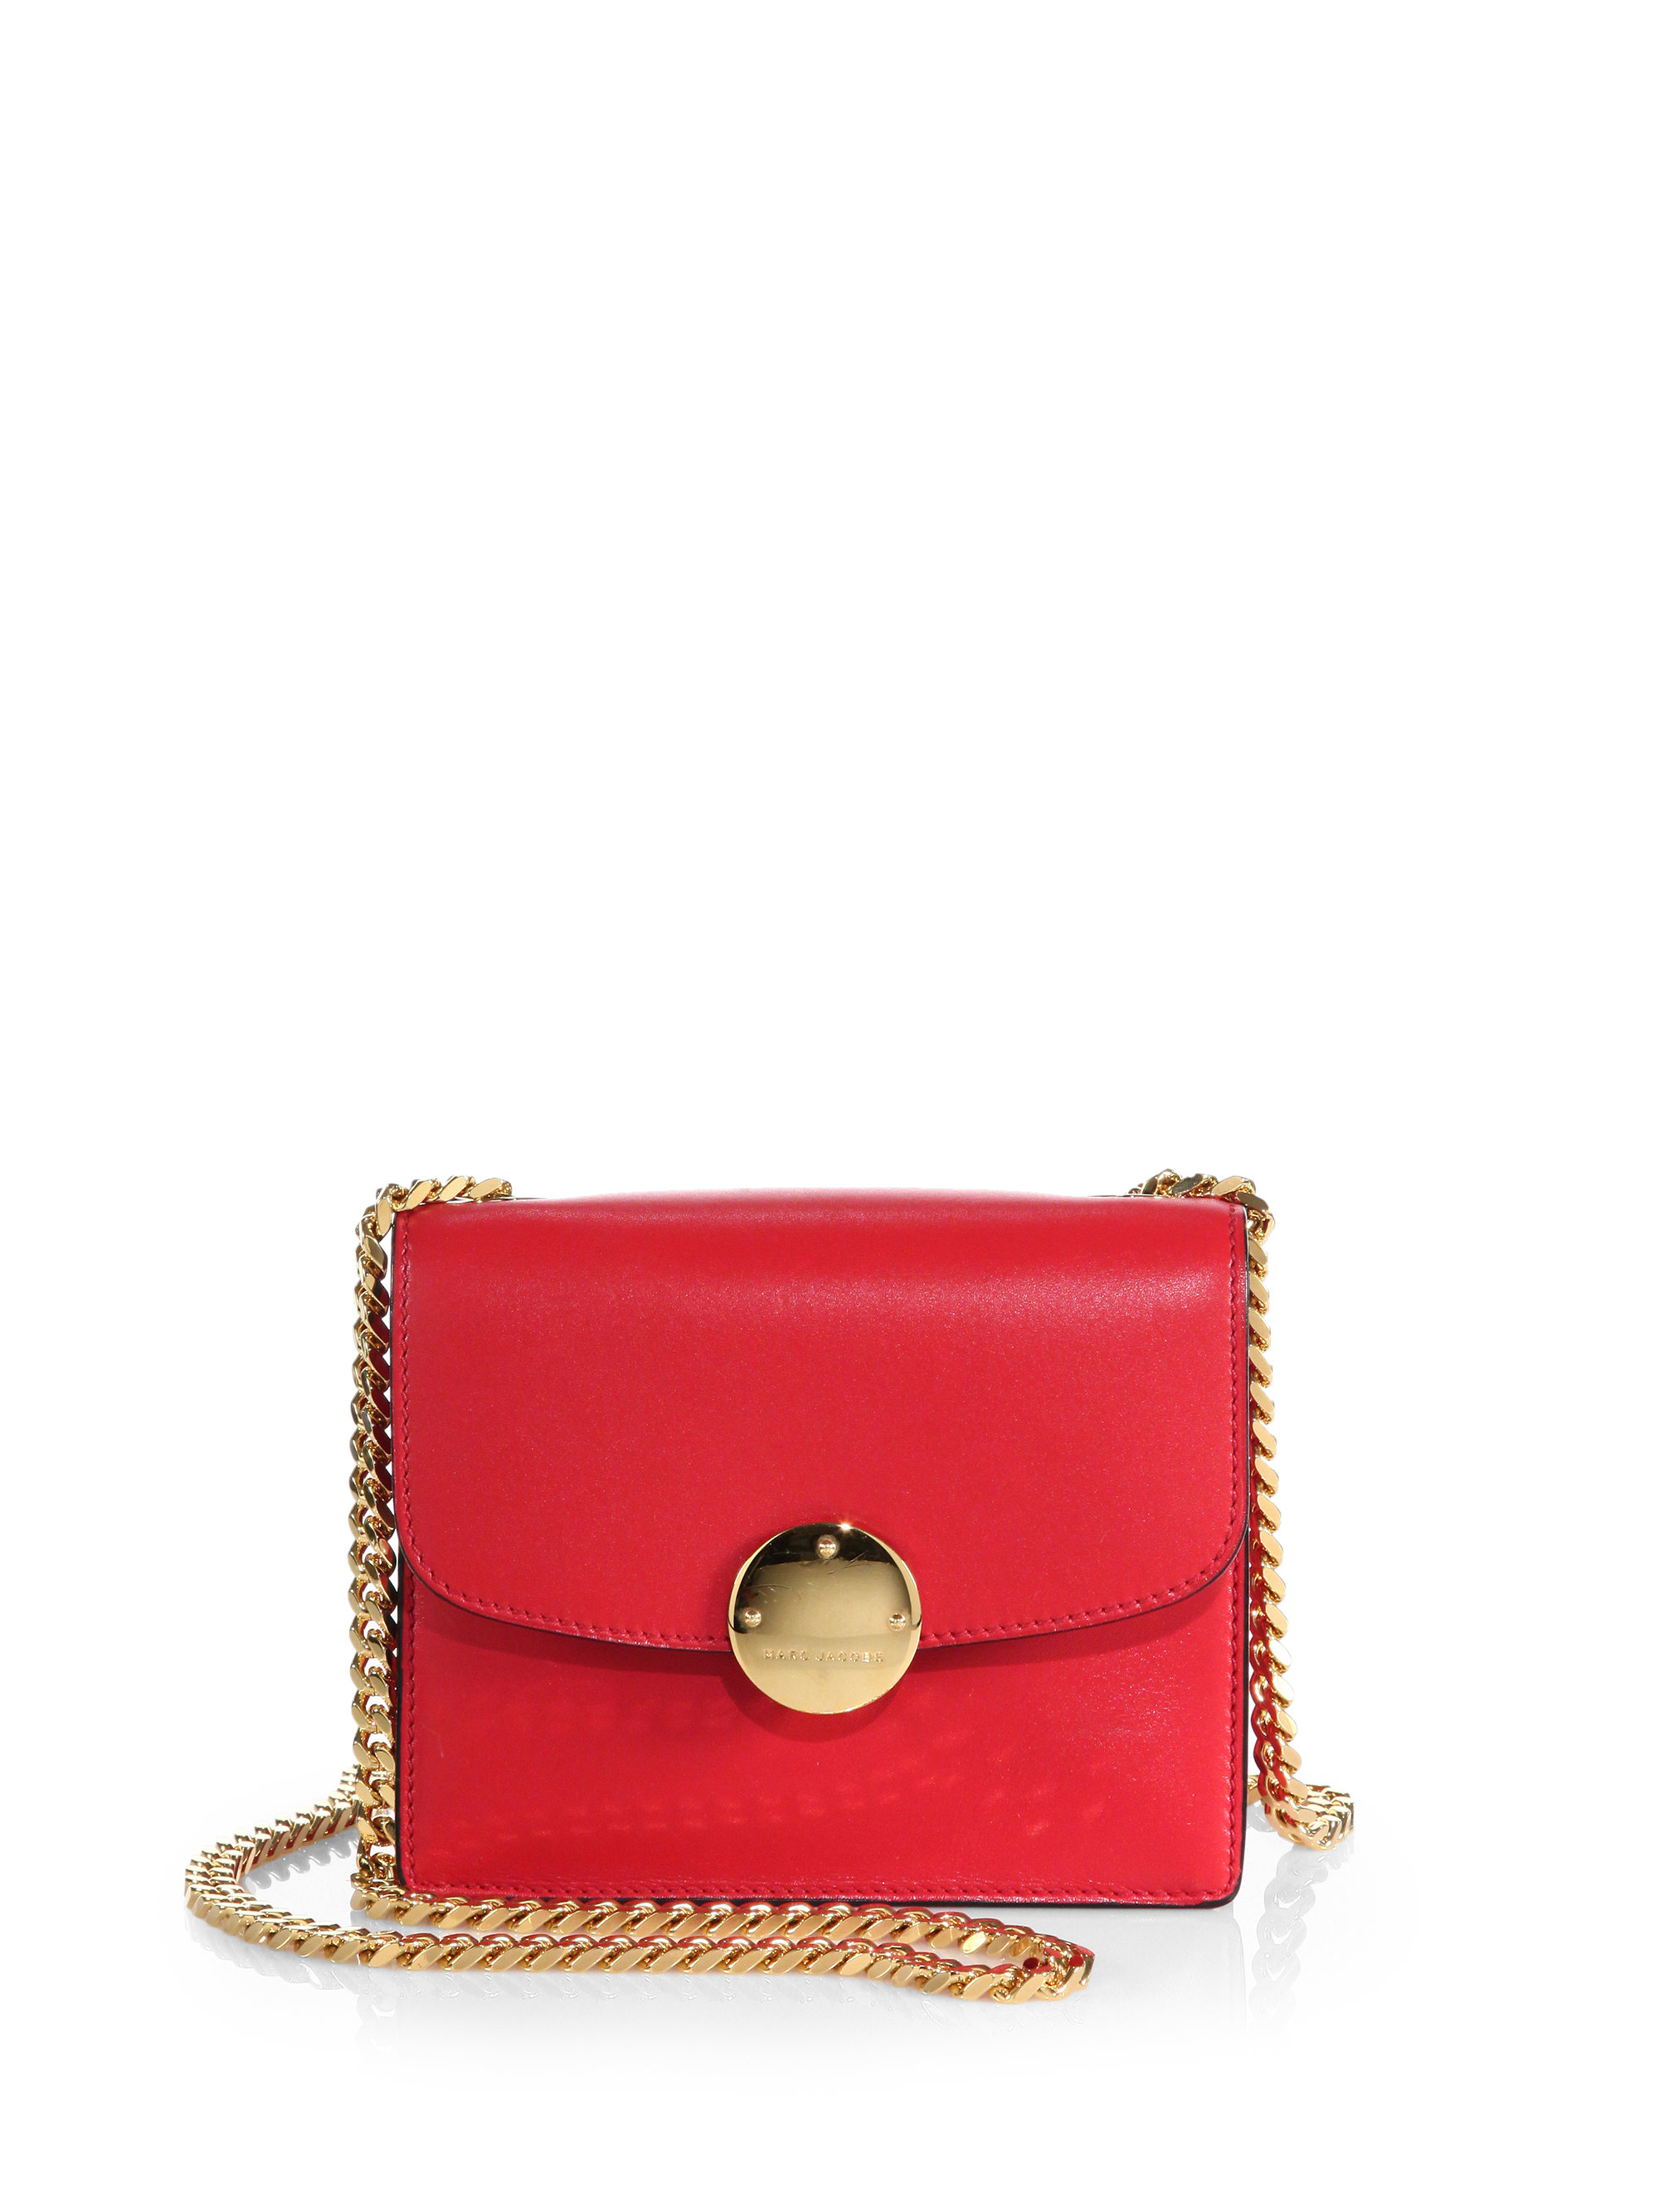 Lyst - Marc Jacobs Trouble Mini Leather Shoulder Bag in Red